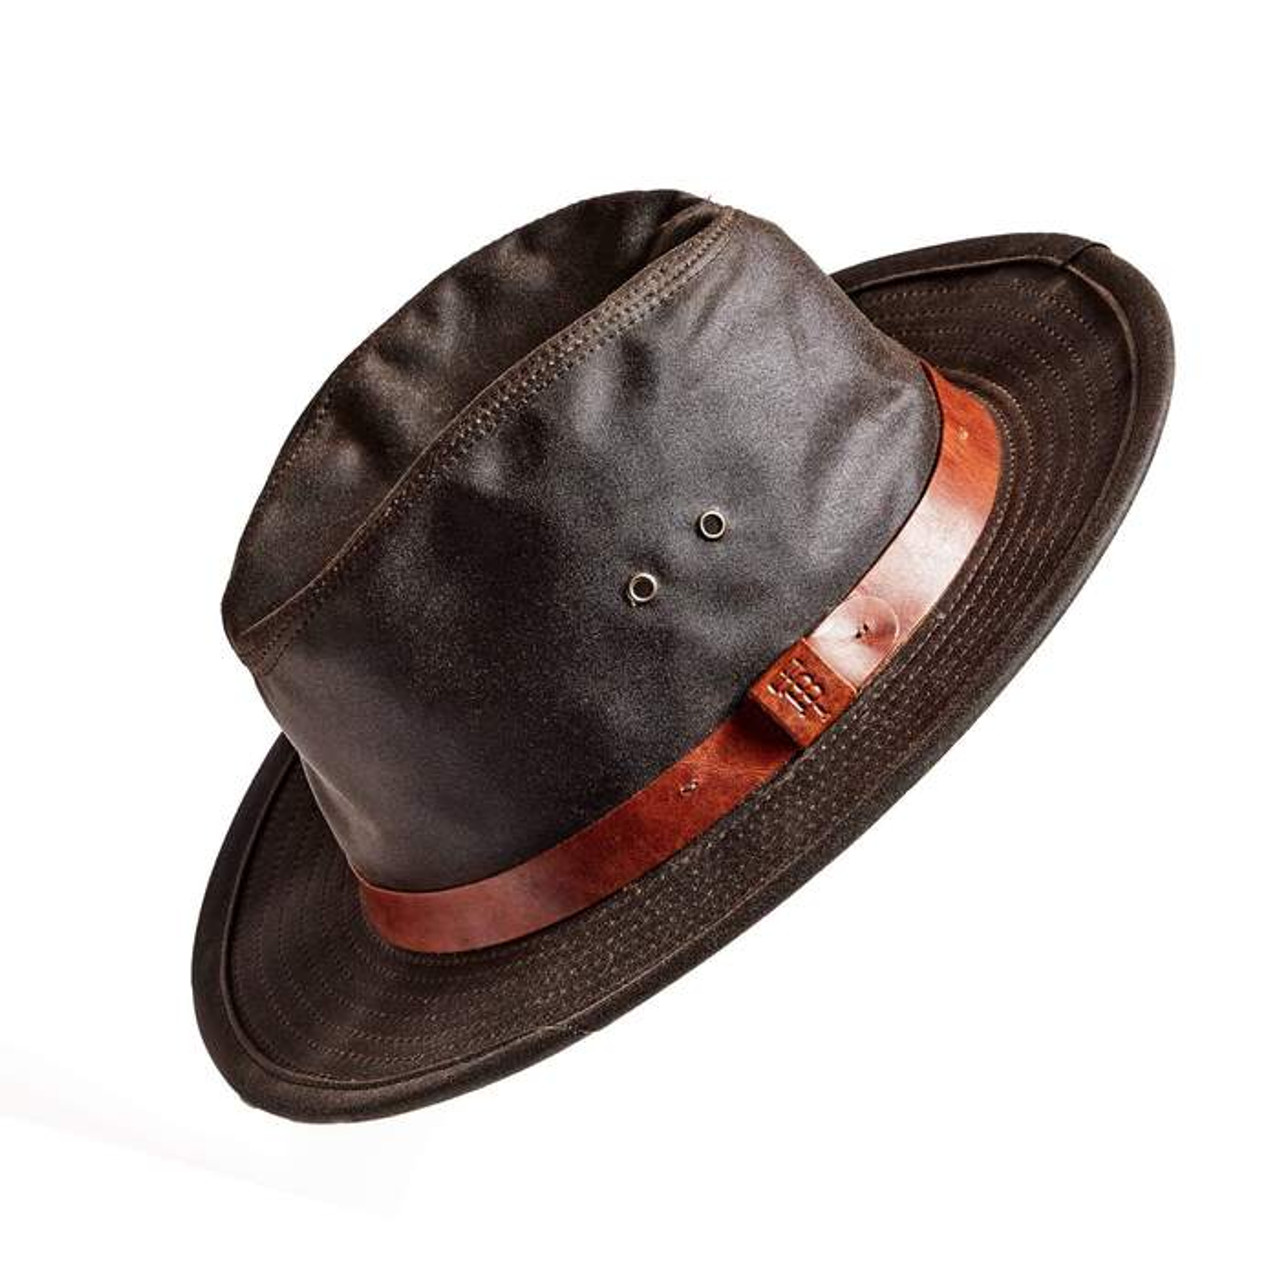 Pin by Shelta Hats on FISHING HATS  Hats for men, Sun hats, Leather hats